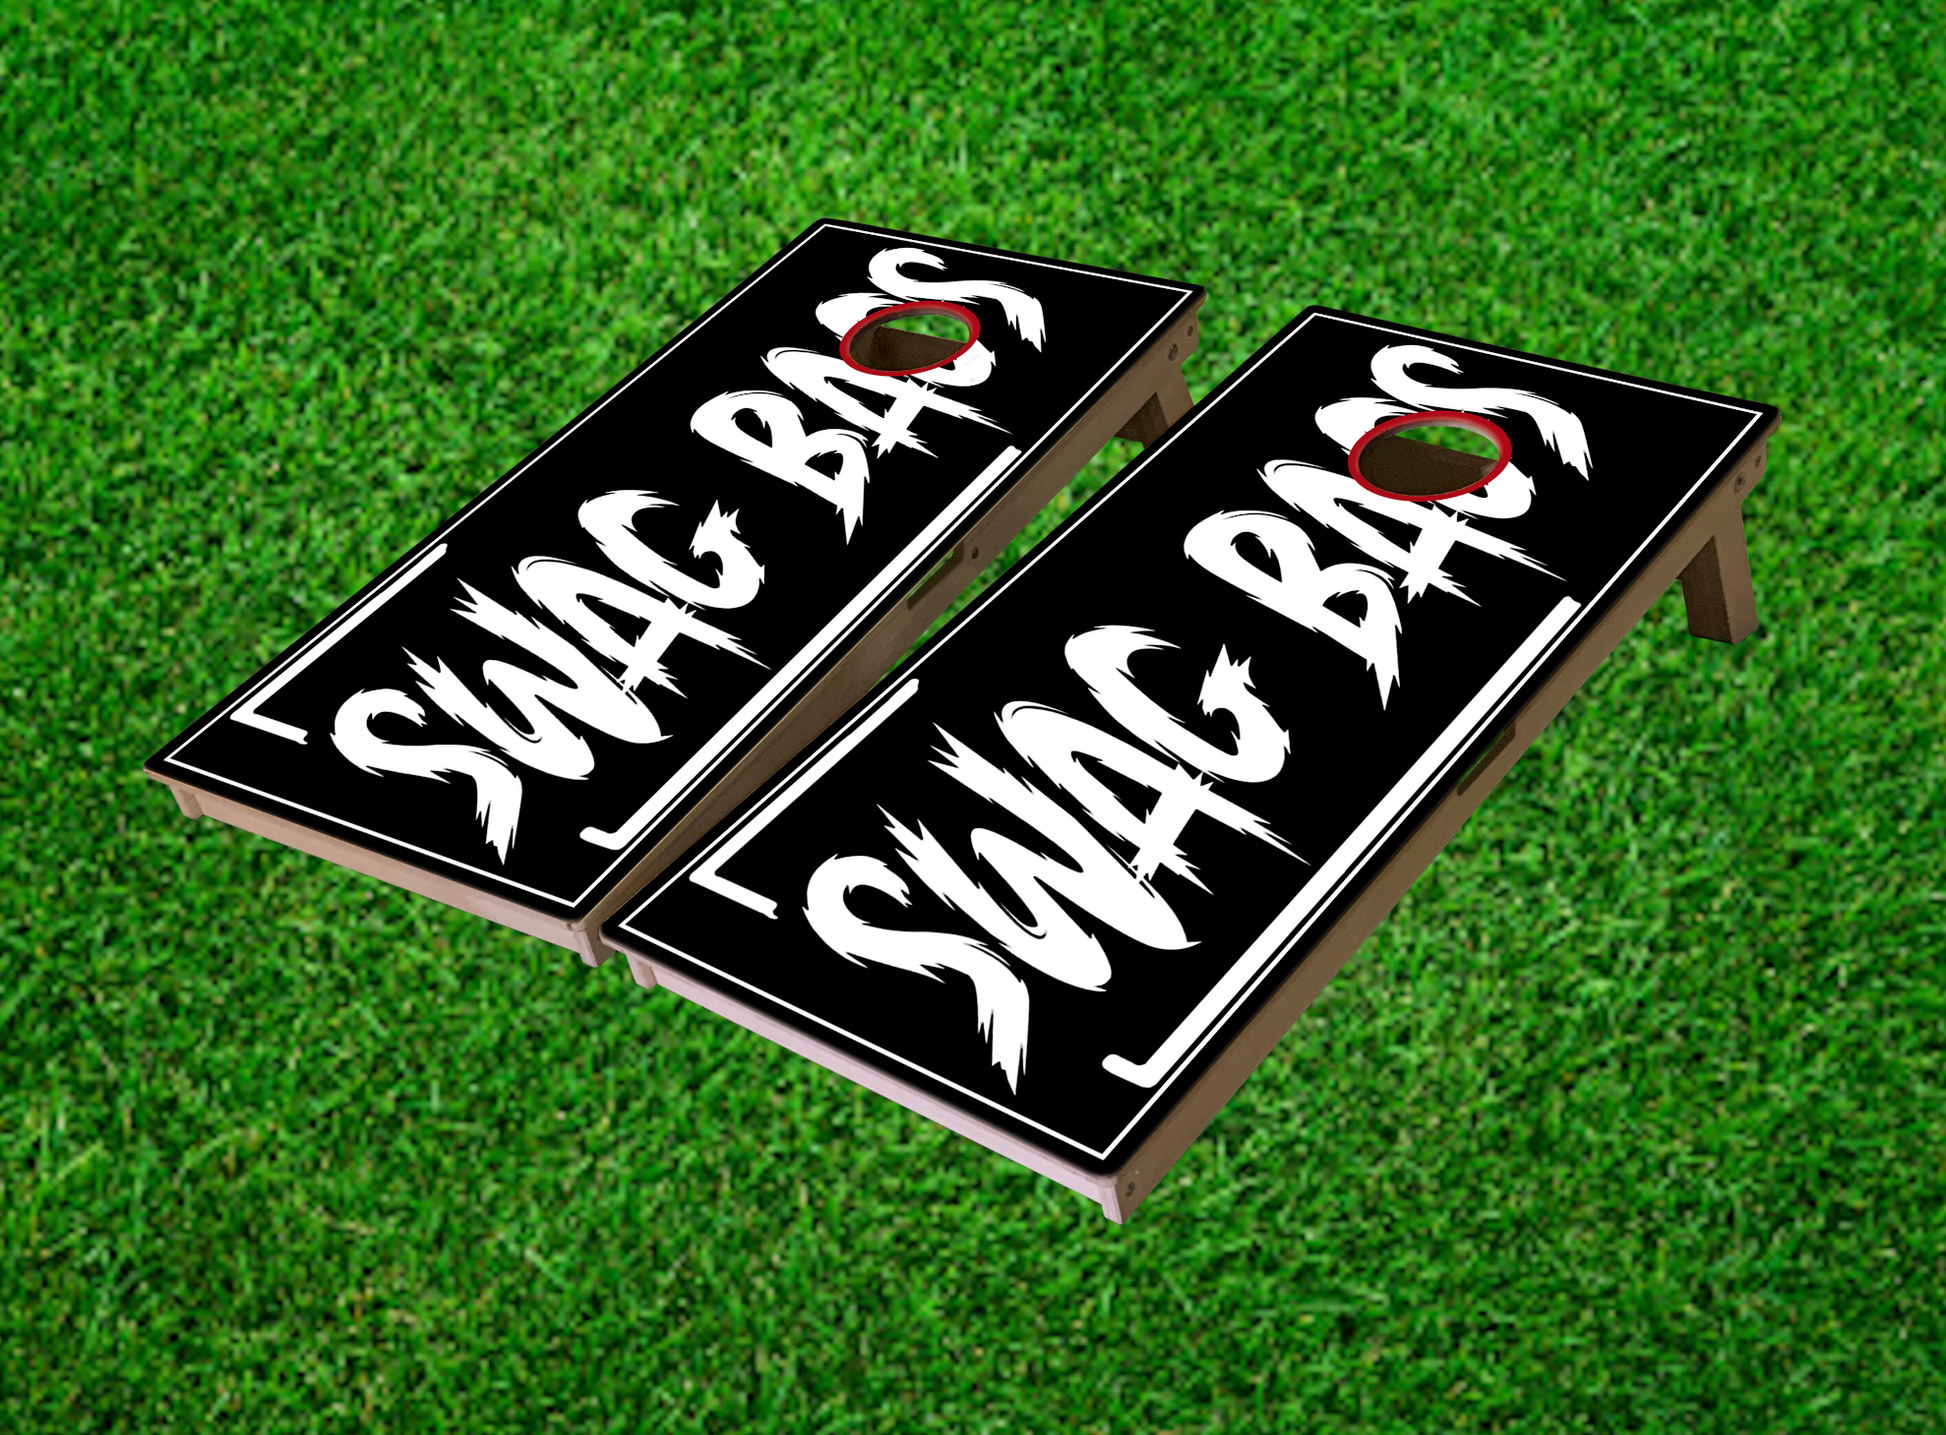 Swag Bags Cornhole Boards (Blackout) - SWAG BAGS